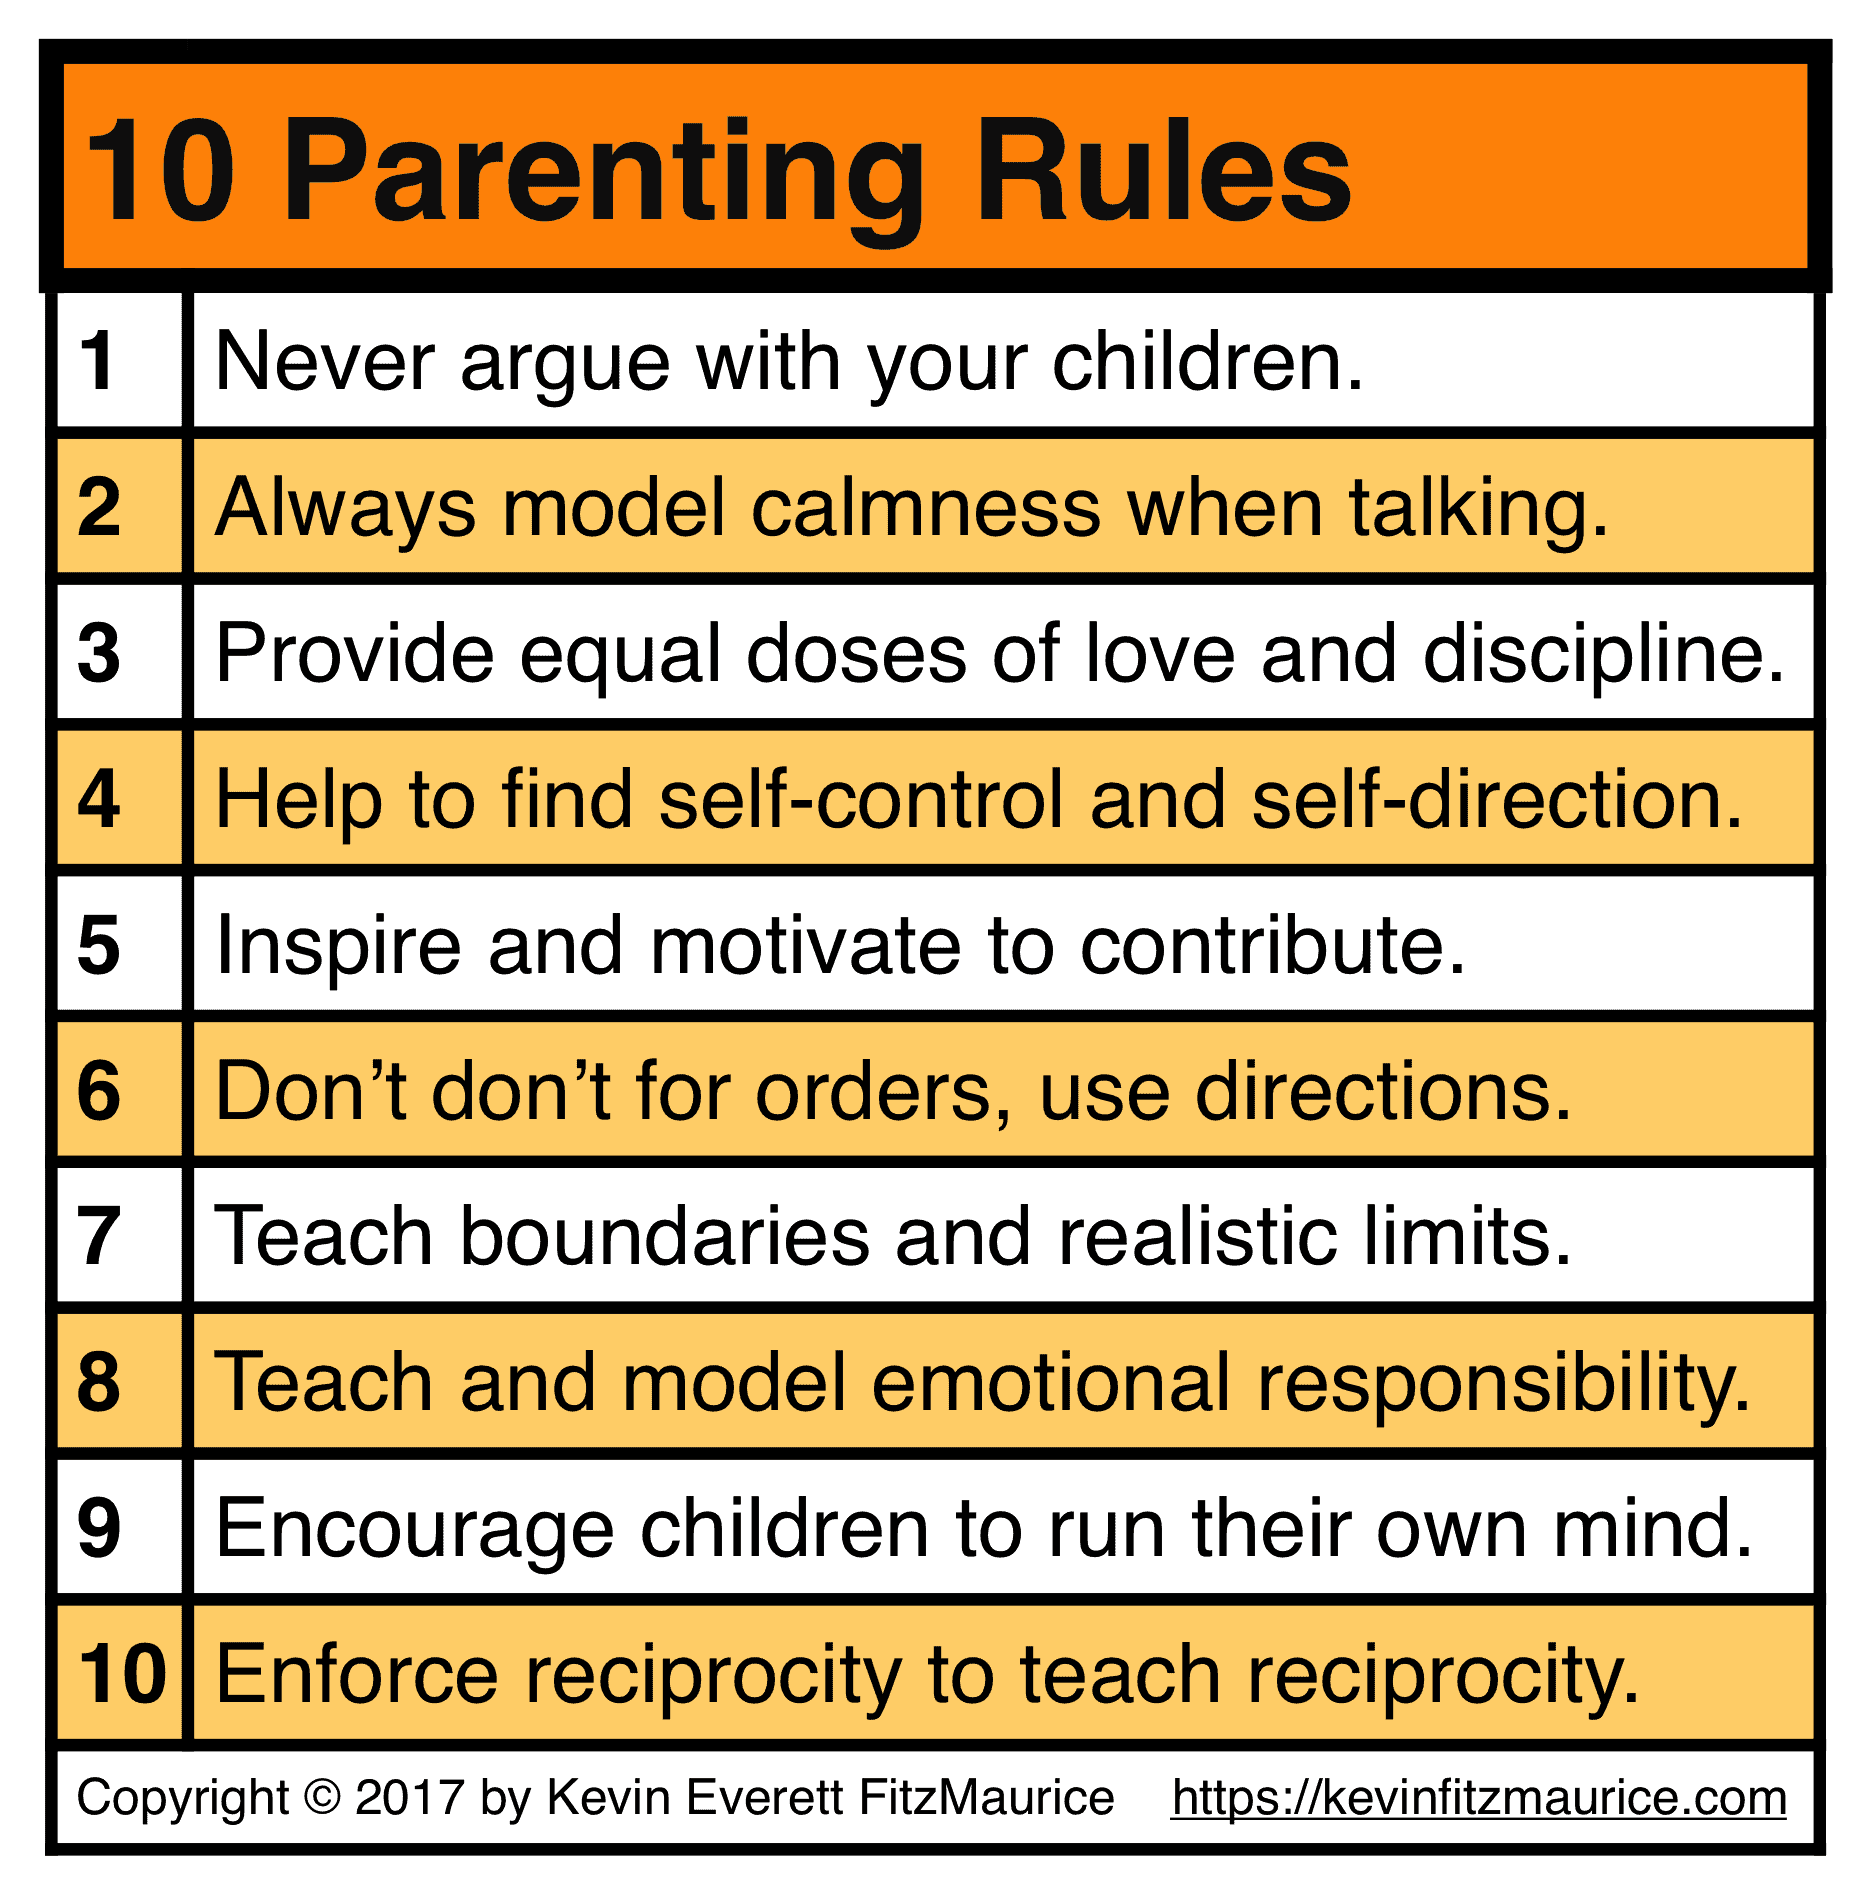 Combine Wants: 10 Parenting Rules to Learn & Practice